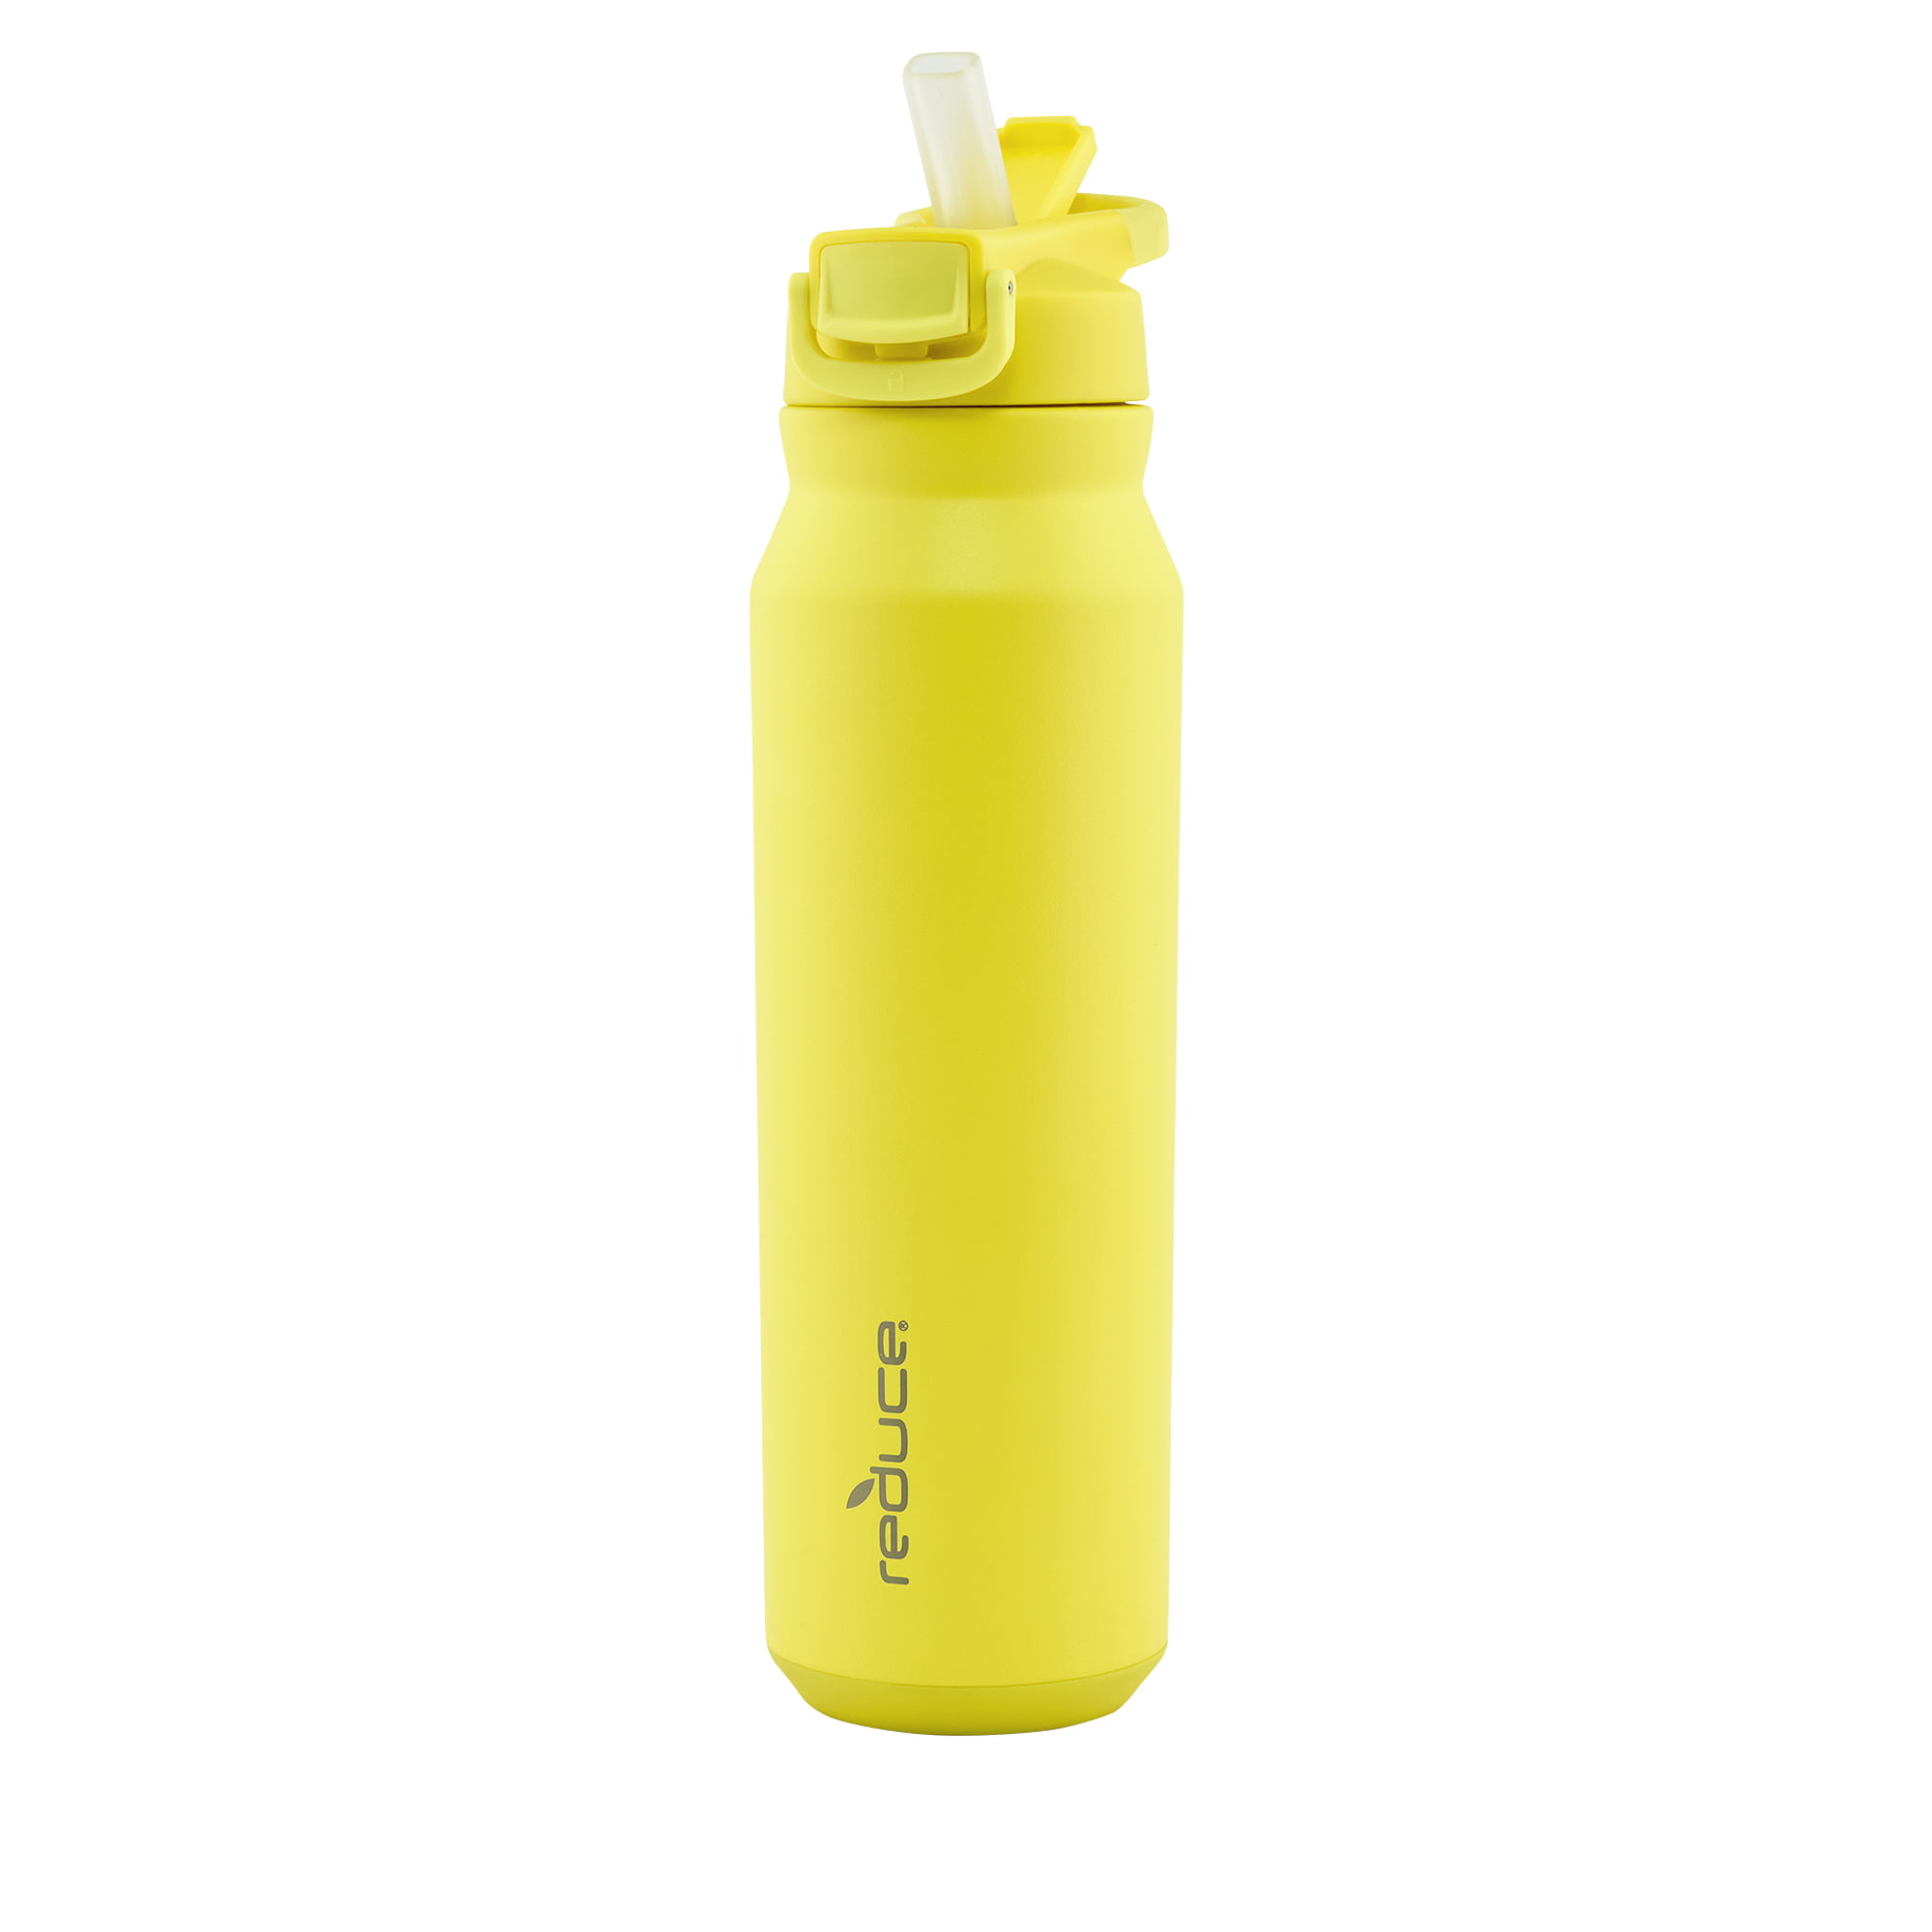 Rubbermaid Double Wall Insulated Water Bottle 17 oz - Yellow